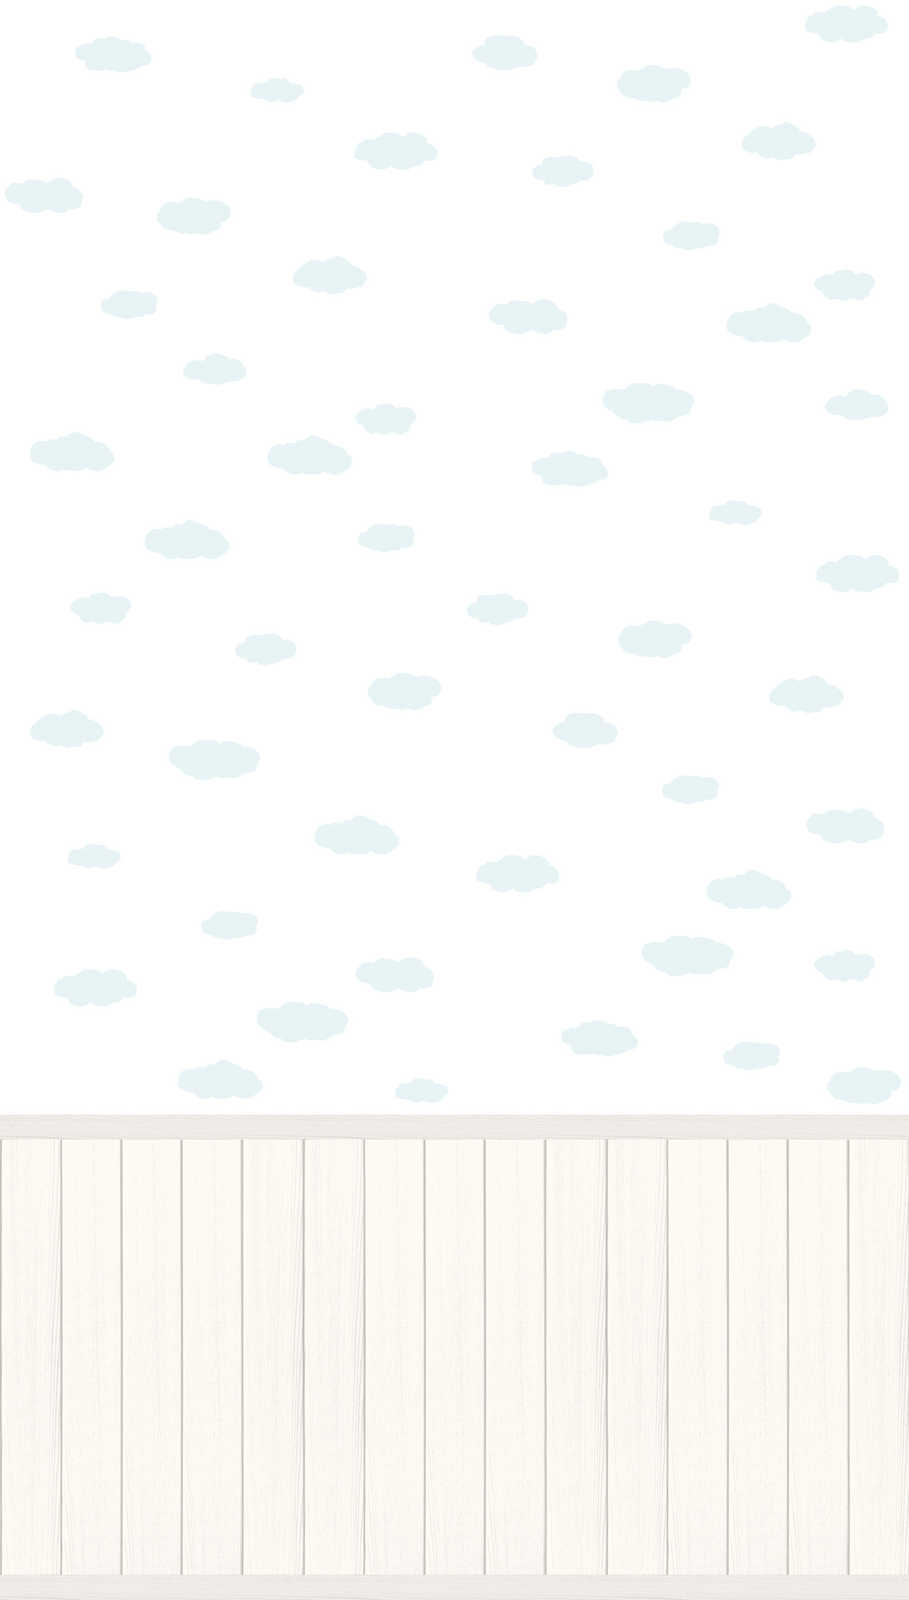             Non-woven motif wallpaper with wood-effect plinth border and cloud pattern - white, blue, grey
        